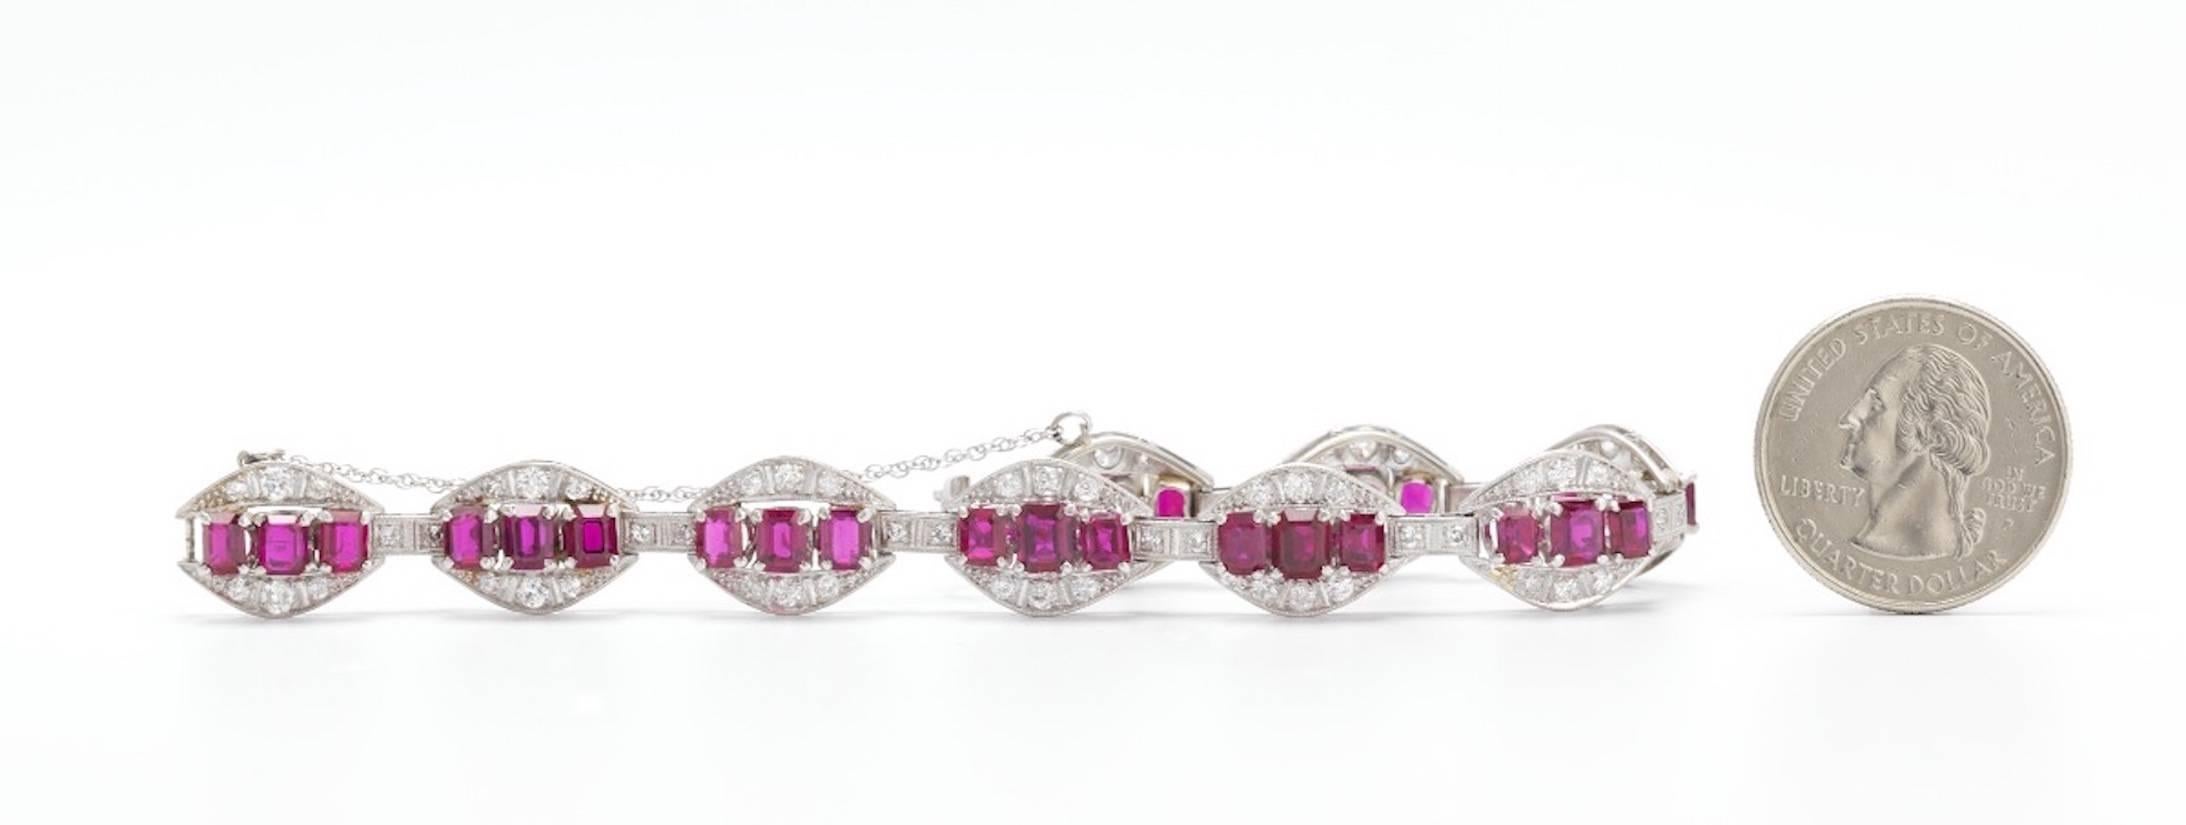 This impressive white gold ruby and diamond bracelet boasts an articulated design with oval links, each link set with emerald cut ruby, and further accentuated with round cut diamonds on top and bottom.  Each link is bracelet with a spacer set with